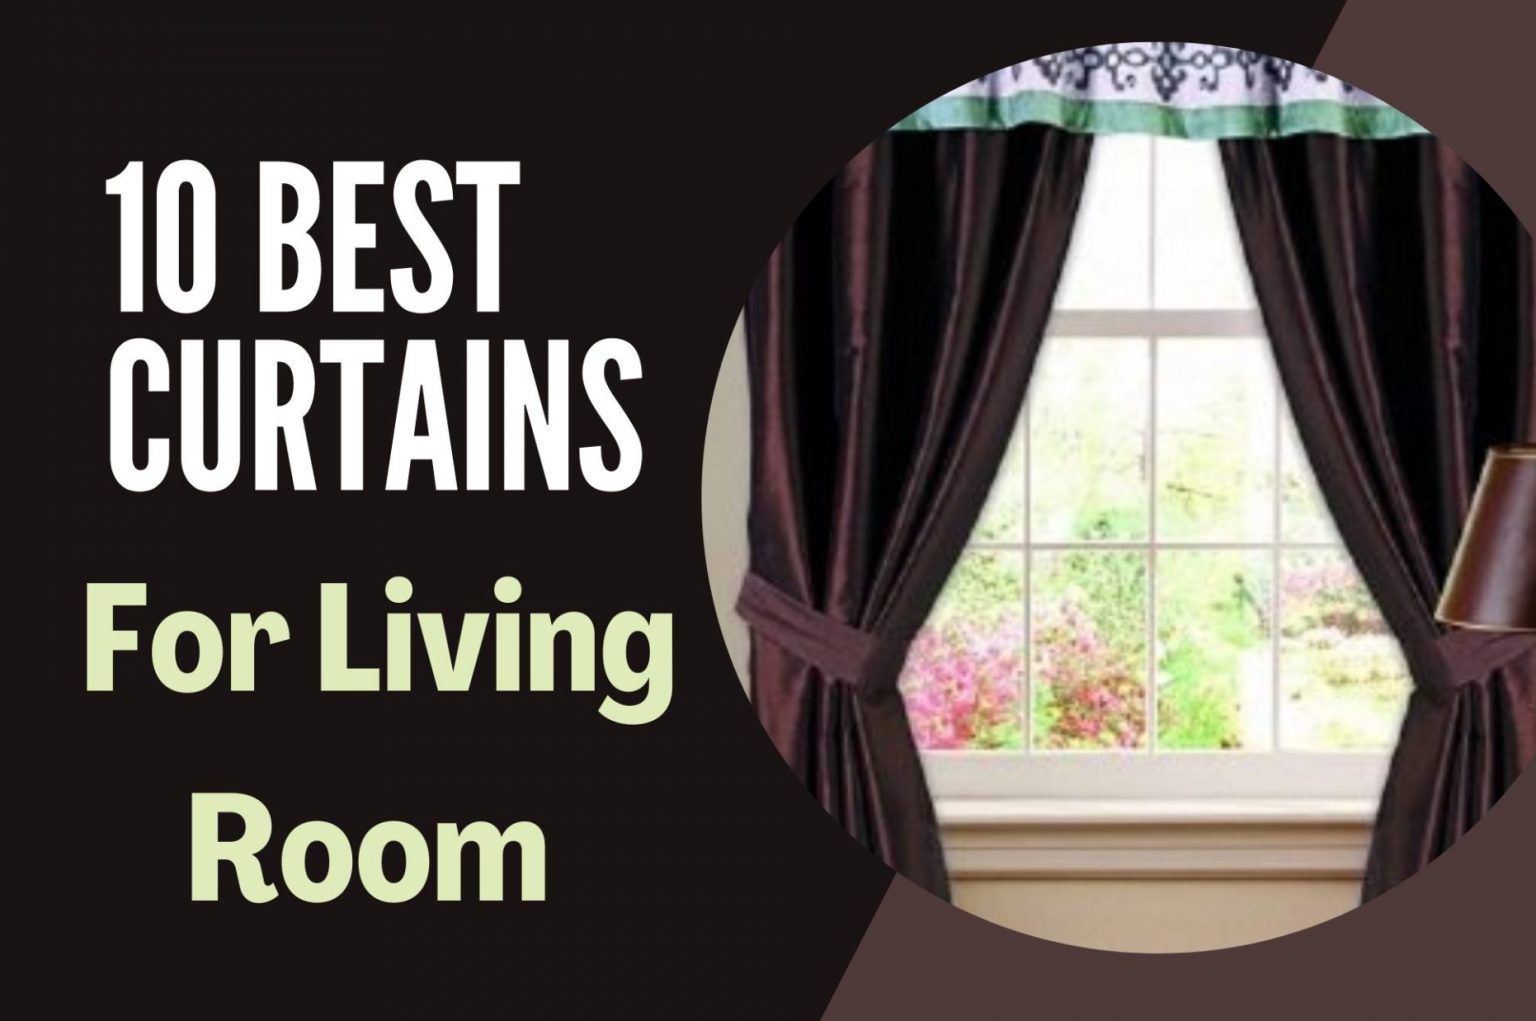 10 best curtains for living room